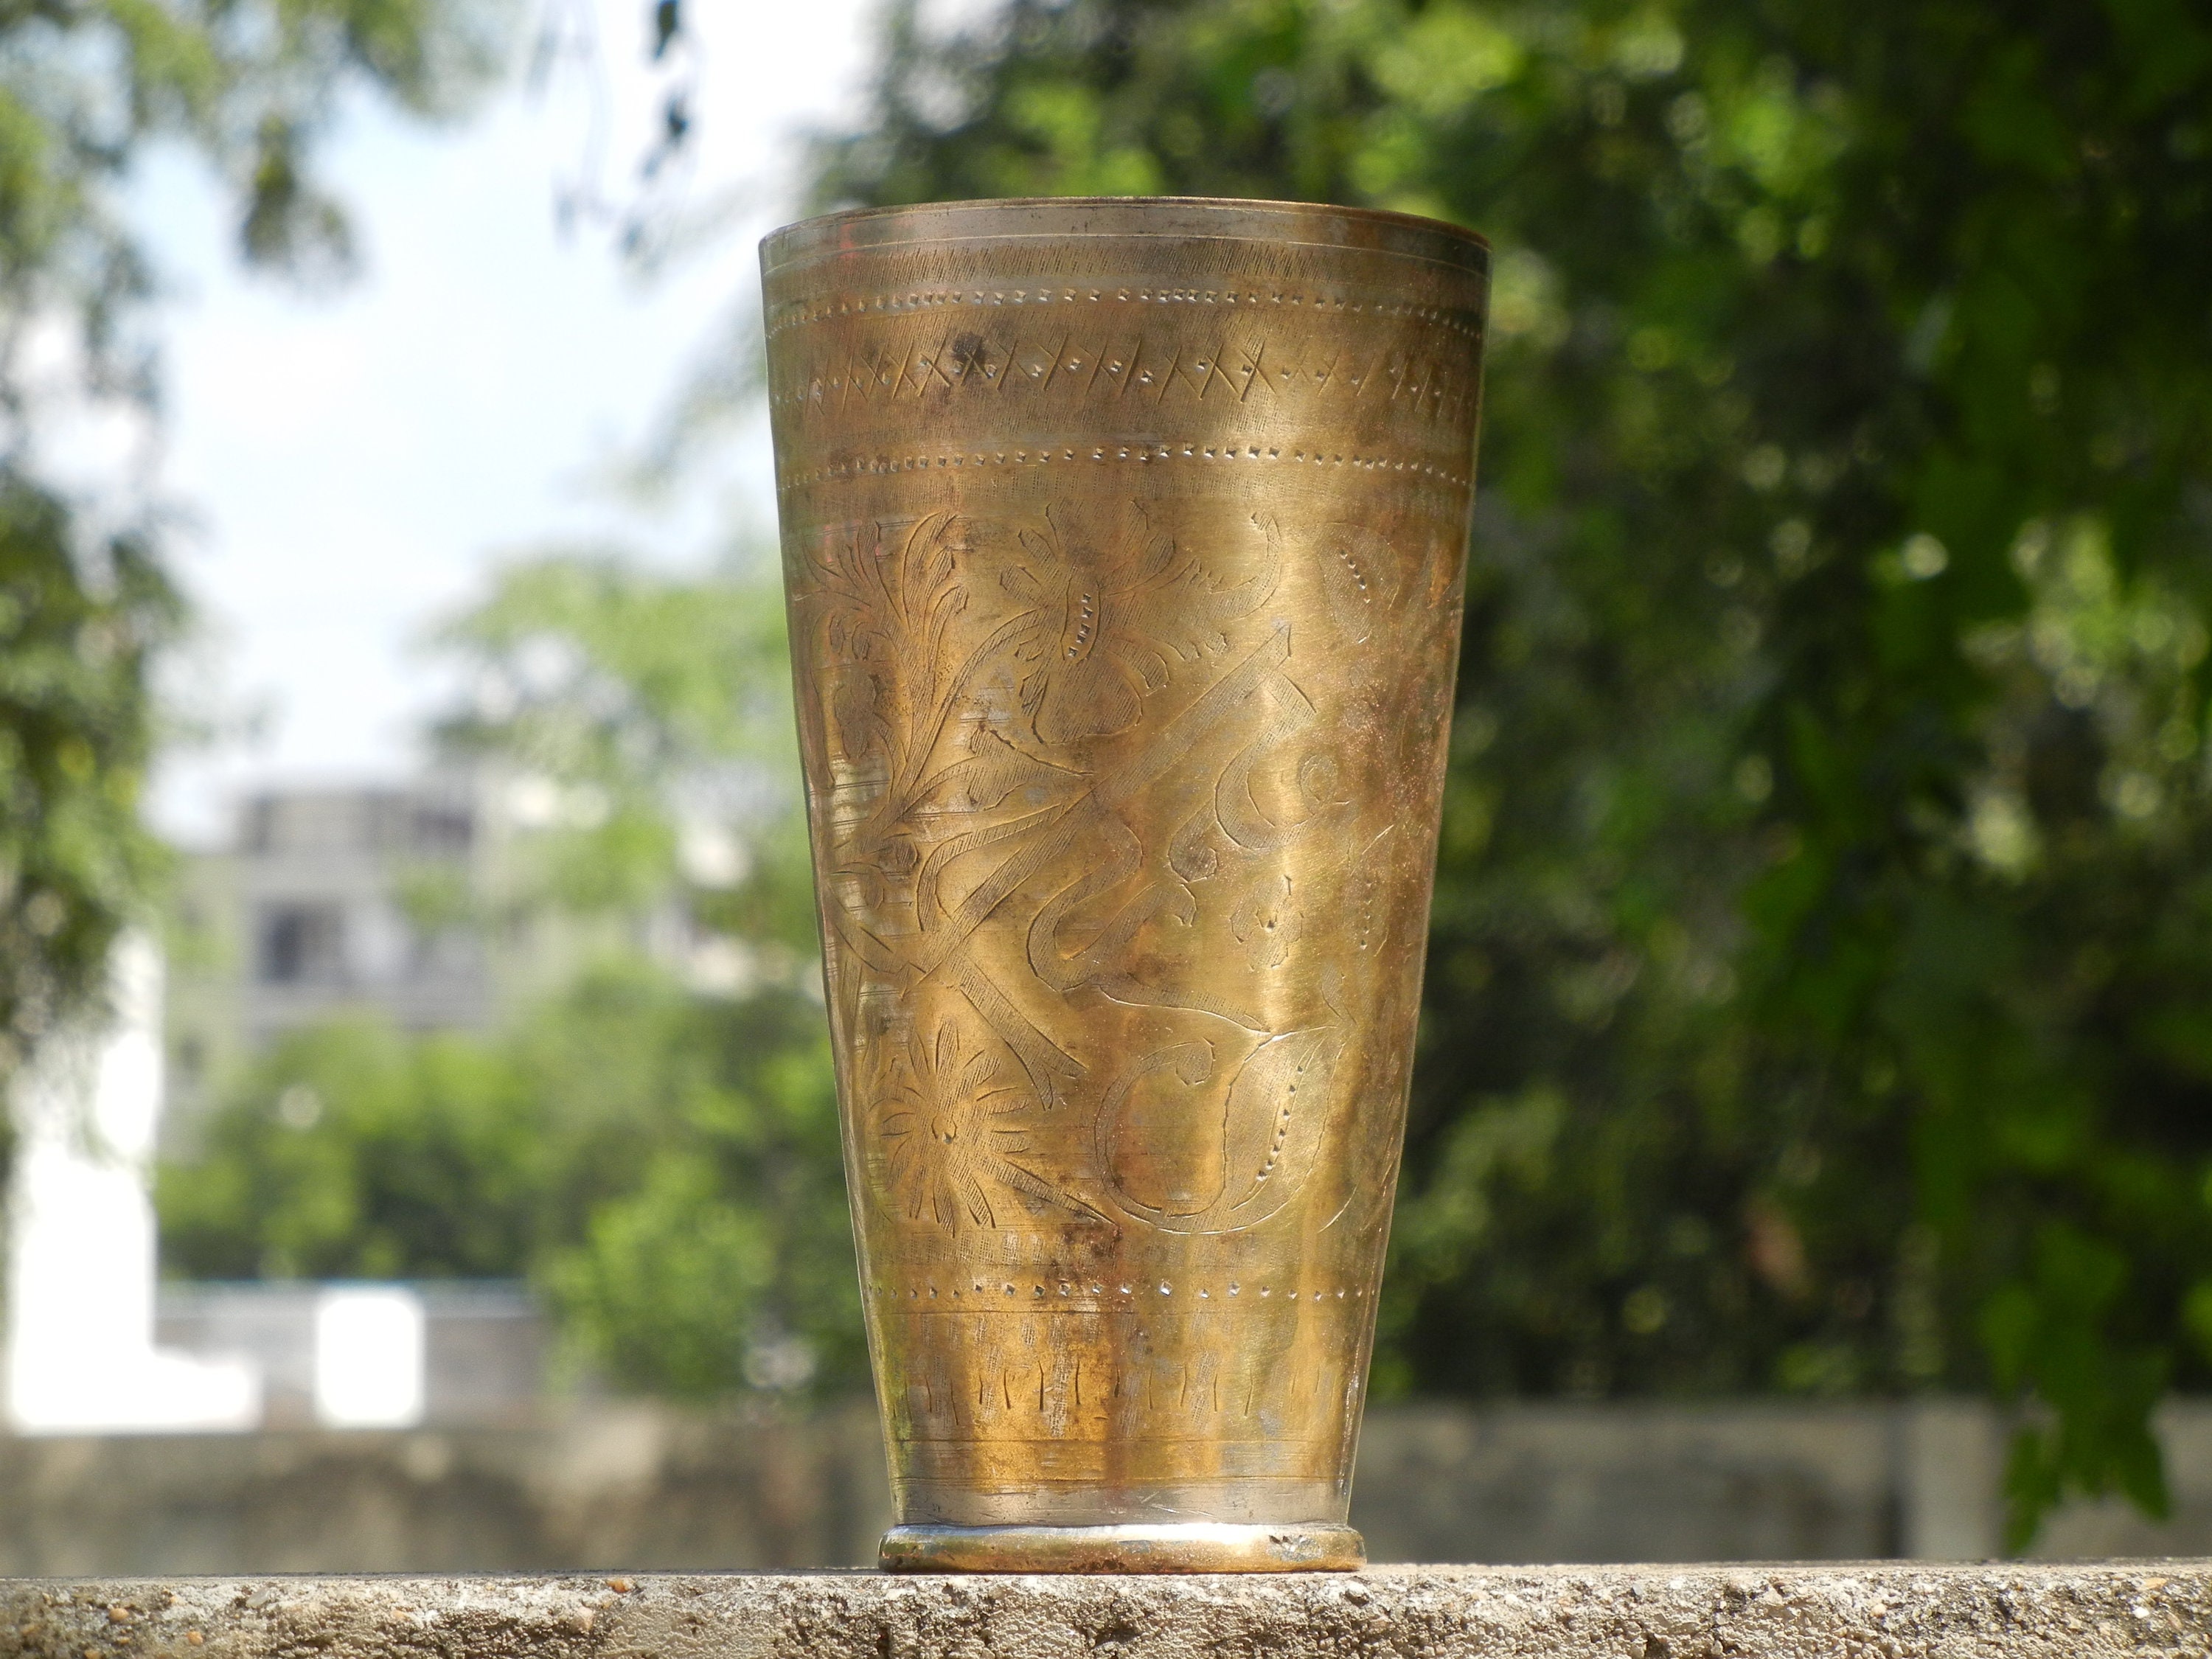 Indian Handmade Brass Decorative Tumbler Kitchen Multi Utility Drinking  Glass Vintage Traditional Collectible Brass Tumbler G66-897 